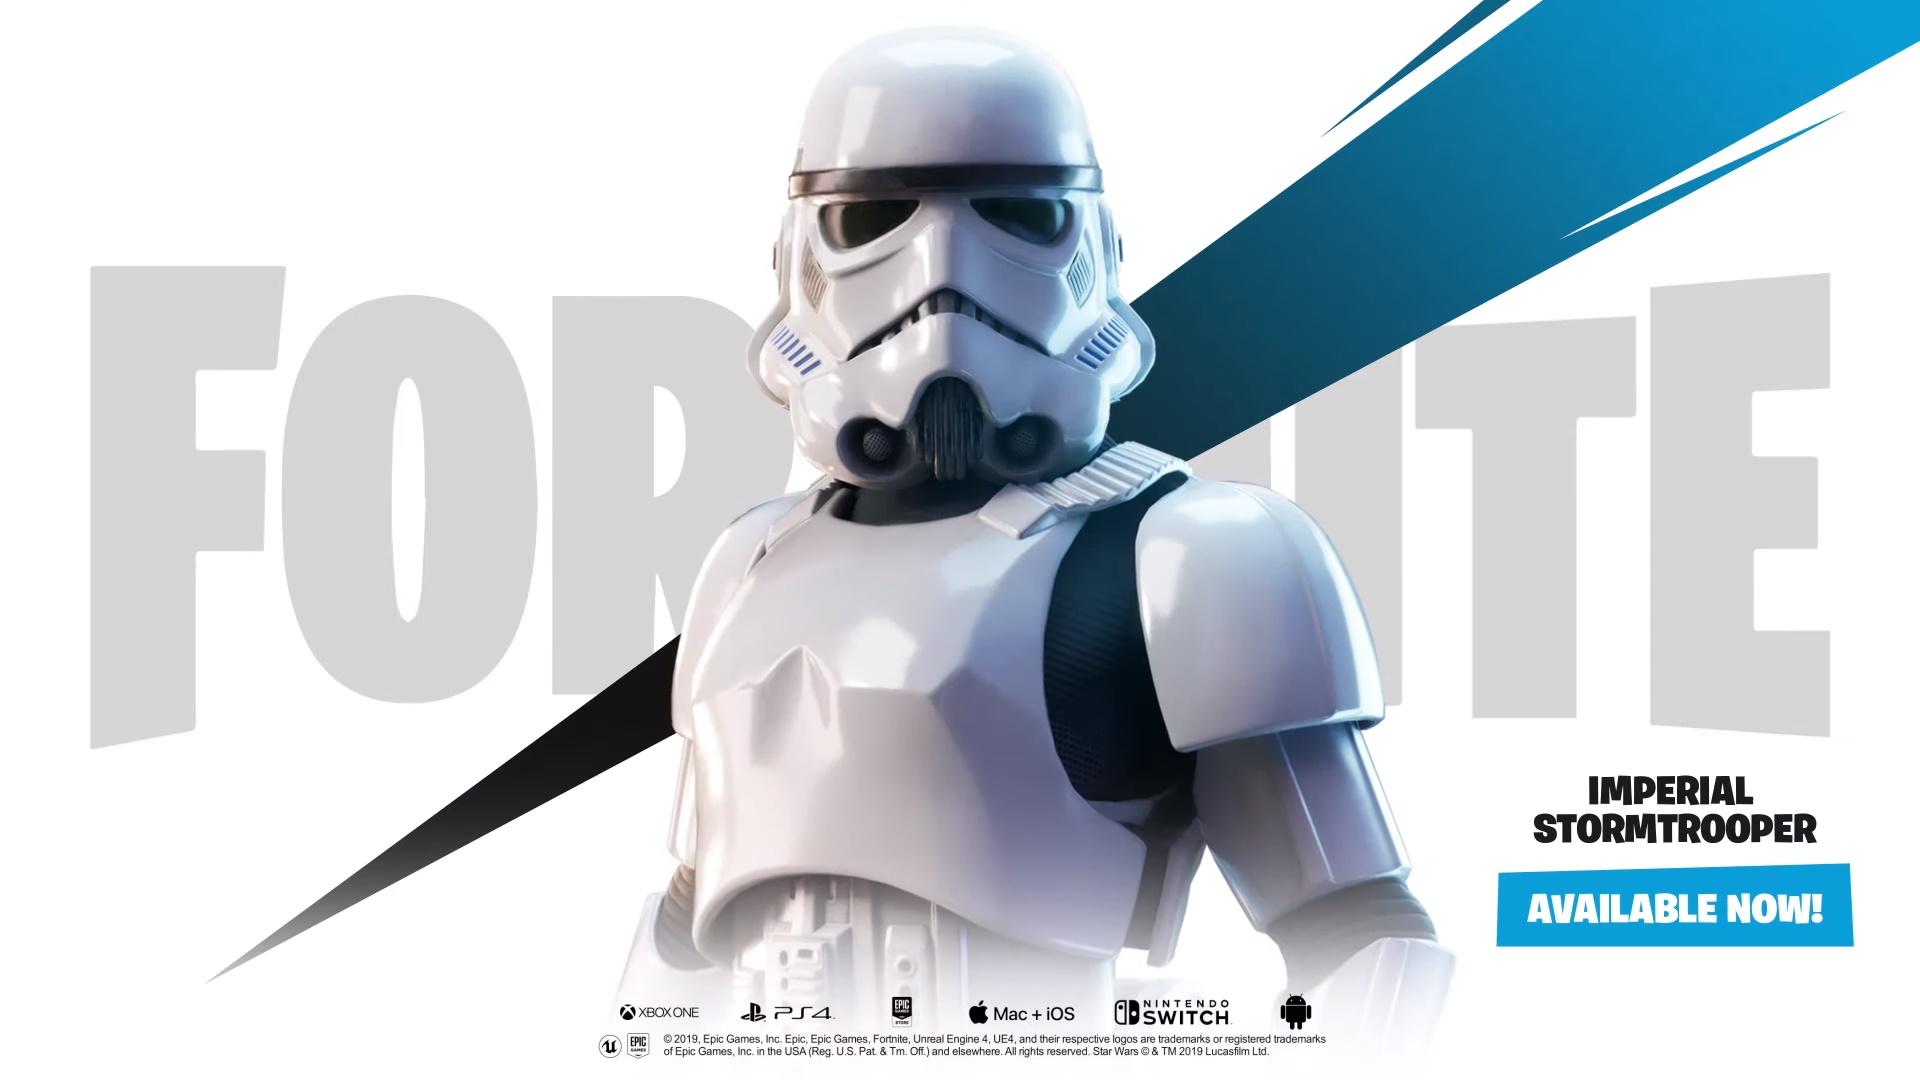 Fortnite x Star Wars event kicks off with a stormtrooper